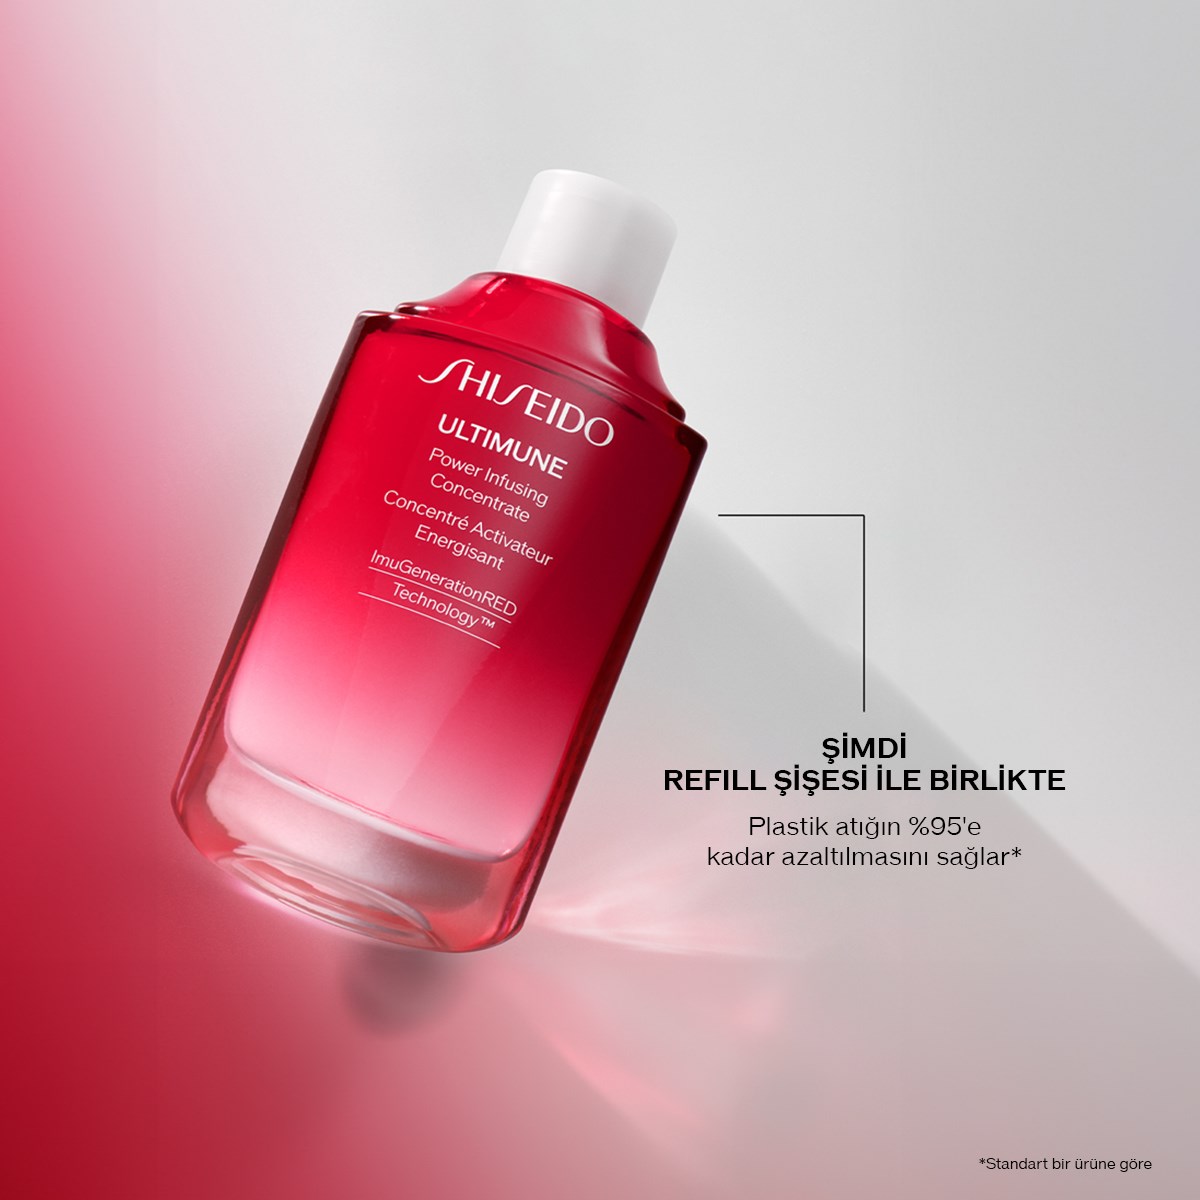 ULTIMUNE POWER INFUSING CONCENTRATE - 75ML - REFILL 6